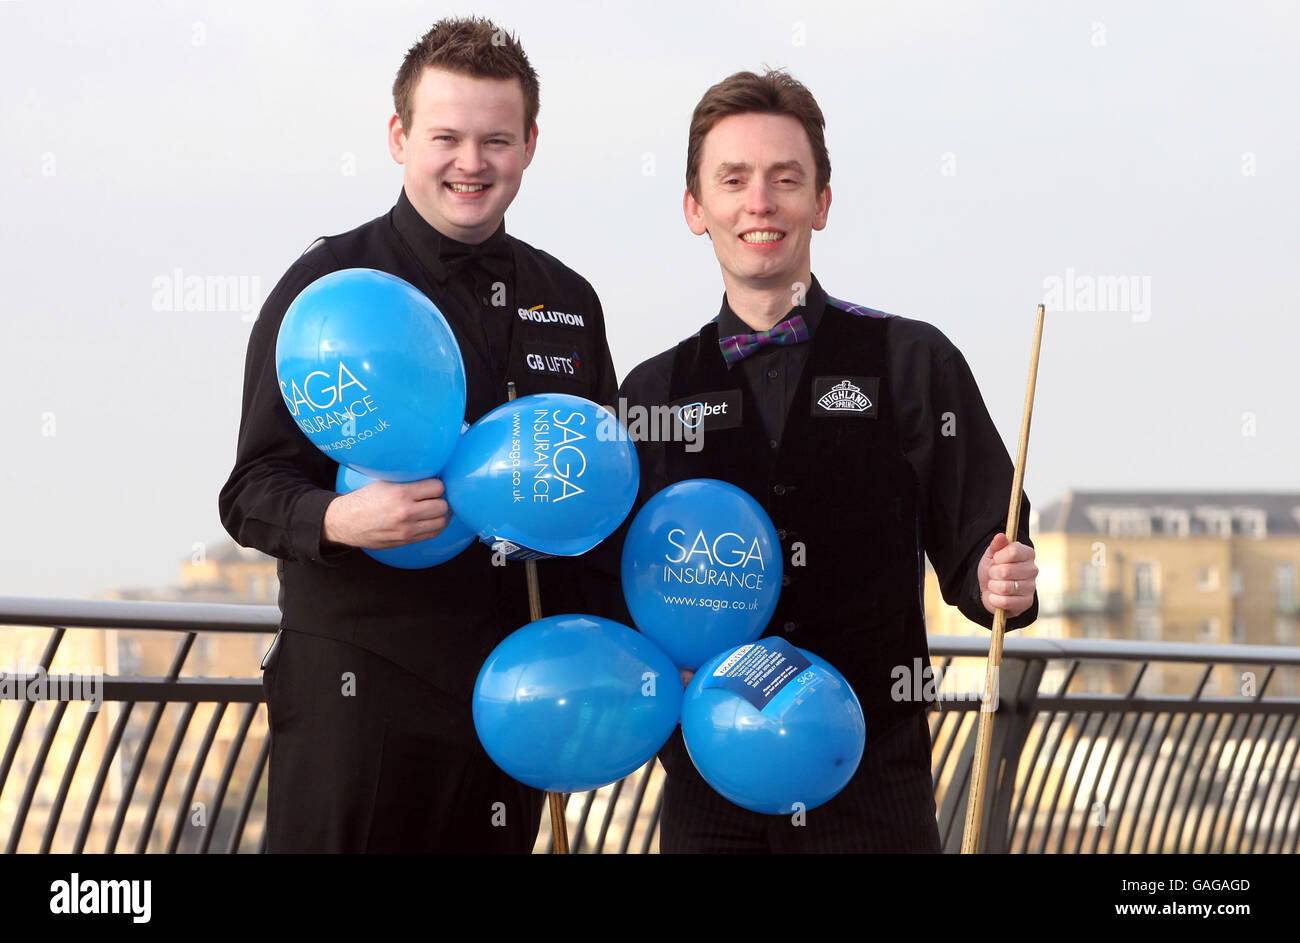 Snooker - SAGA Insurance Masters - Official Launch - Canary Wharf. Snooker players Ken Doherty (right) and Shaun Murphy launch the SAGA Insurance Masters by releasing 200 balloons in Canary Wharf, London. Stock Photo